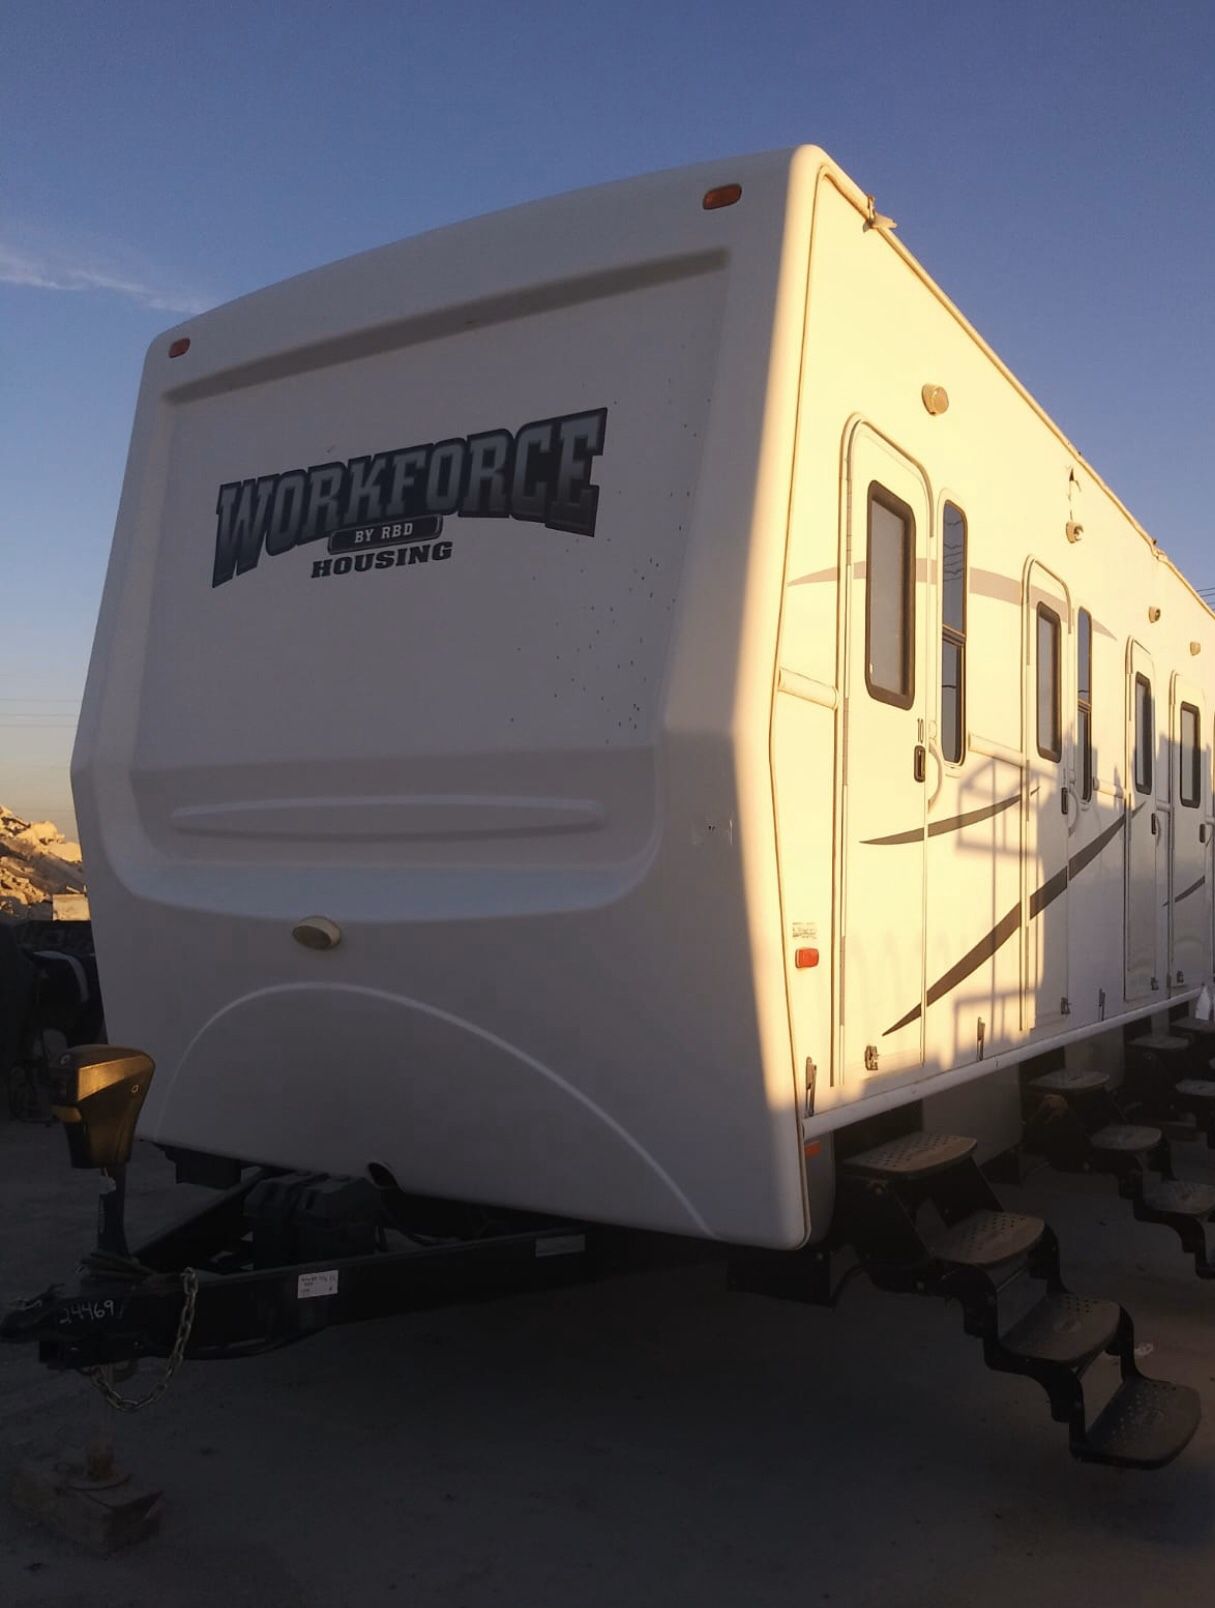 2016 Workforce 10 room Housing Camper 2 complete bathrooms A/C Cable nice condition